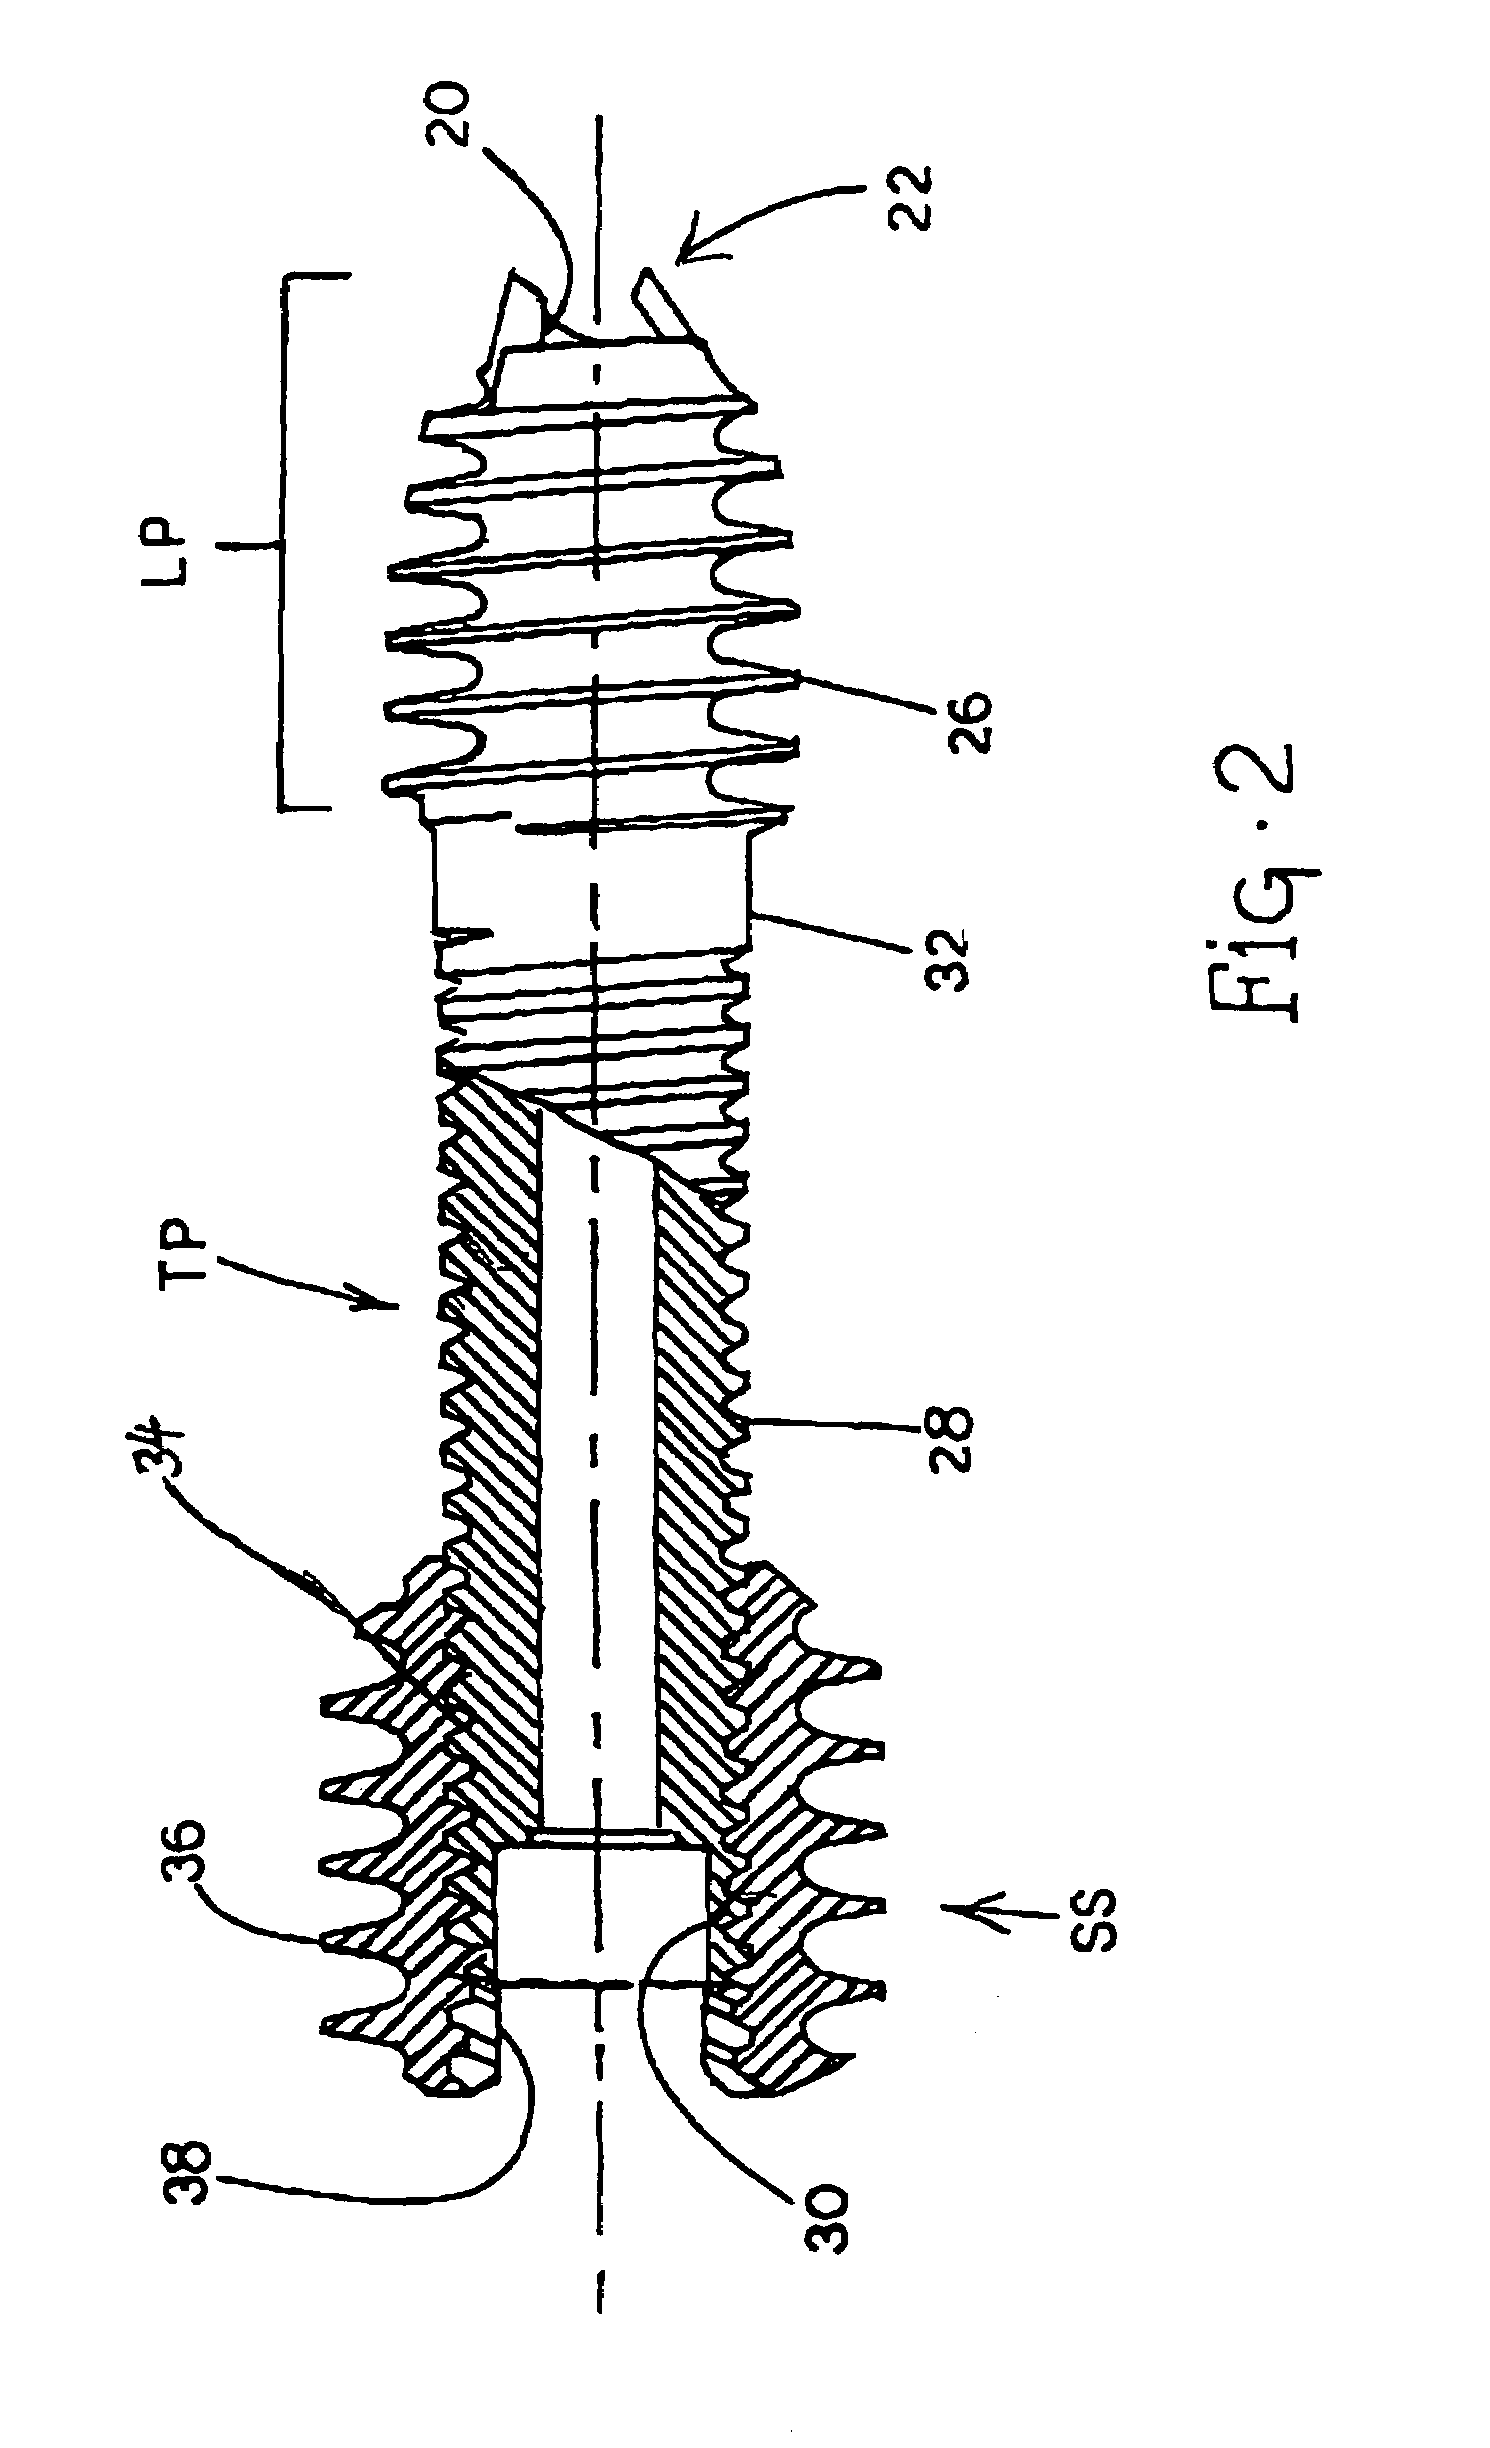 Compression screw apparatuses, systems and methods